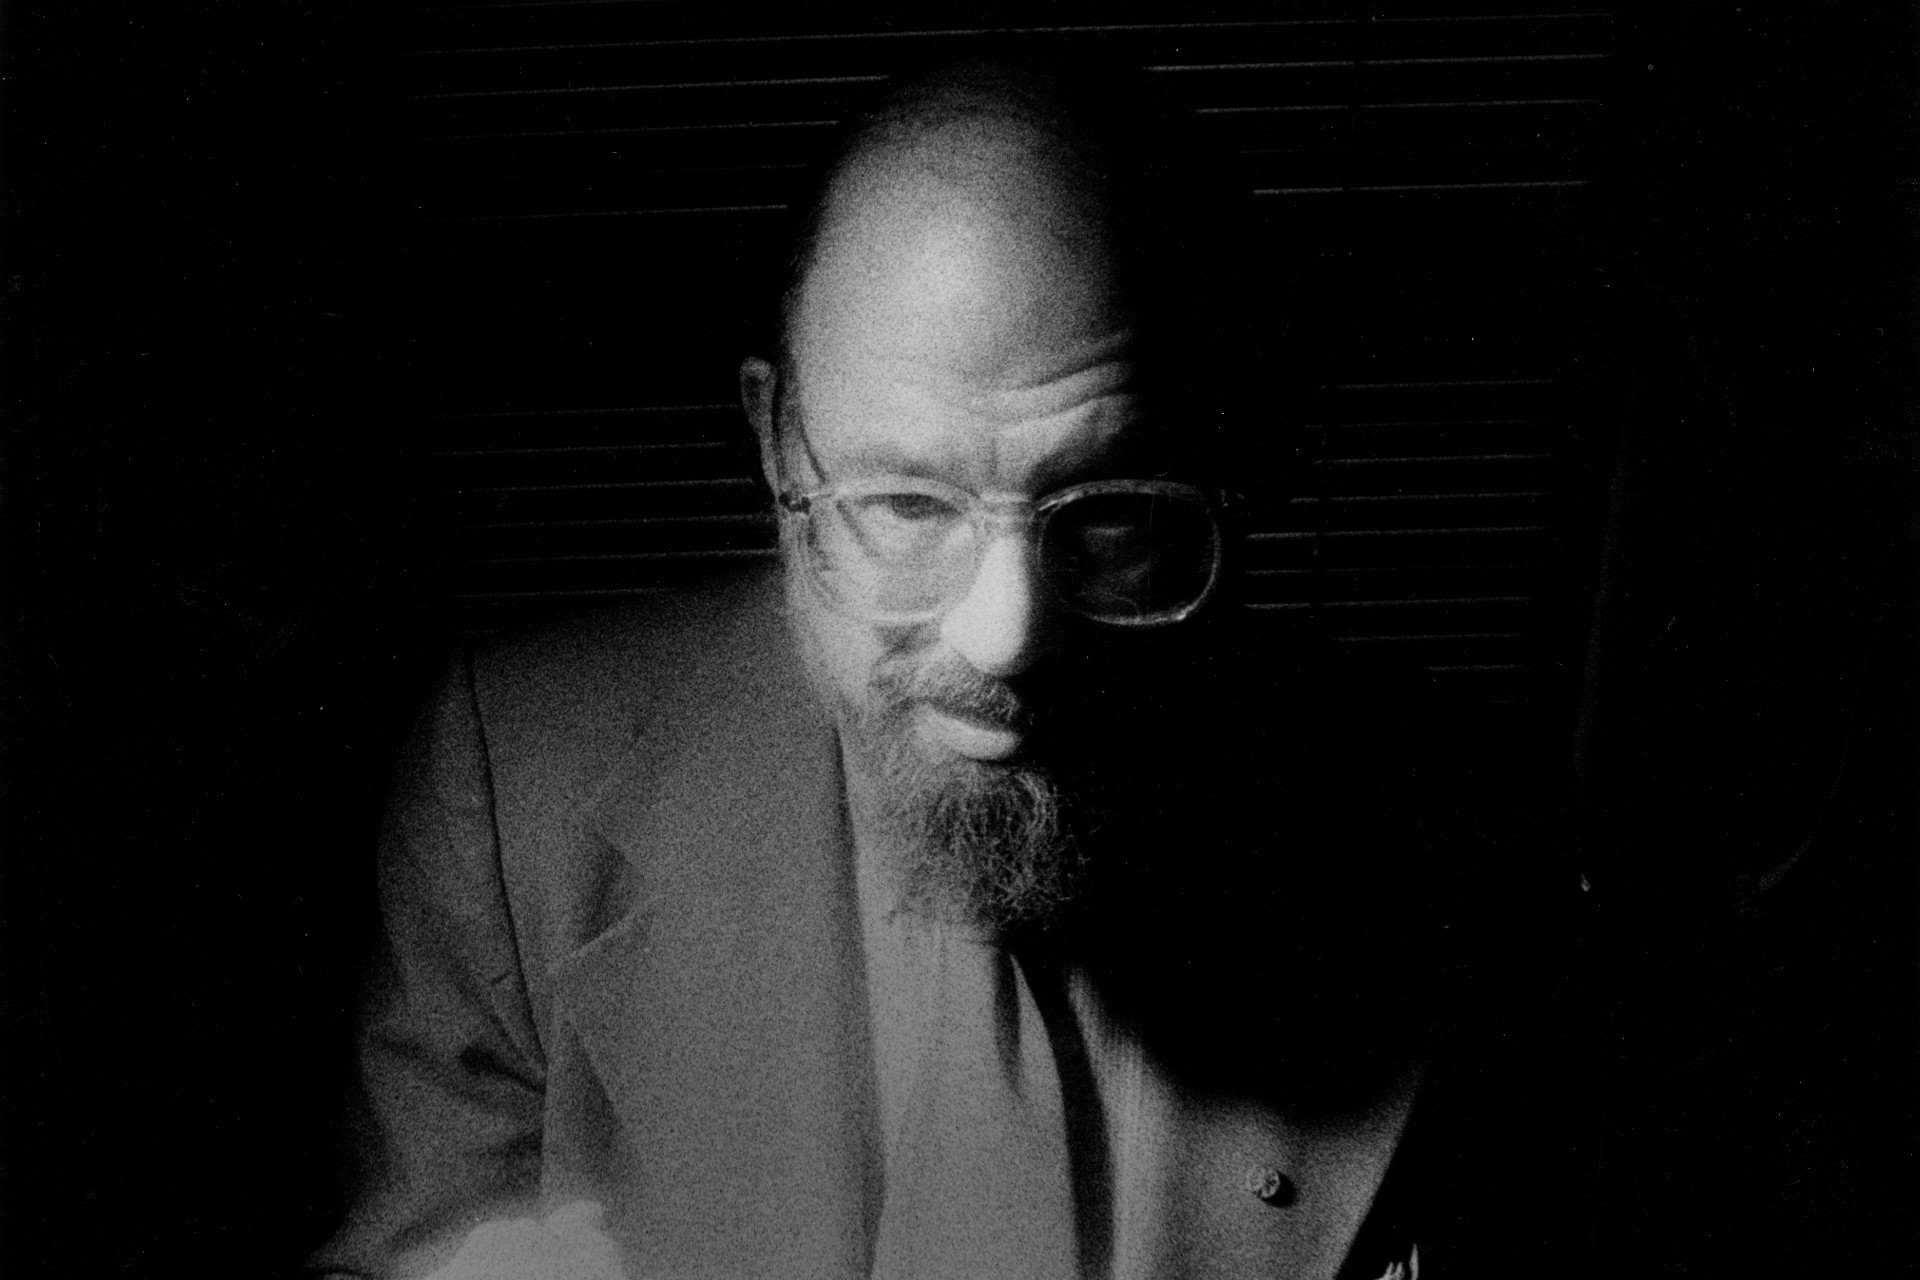 Allen Ginsberg, photo by Macioce (1984, Ginsberg at his East Village NYC Home)